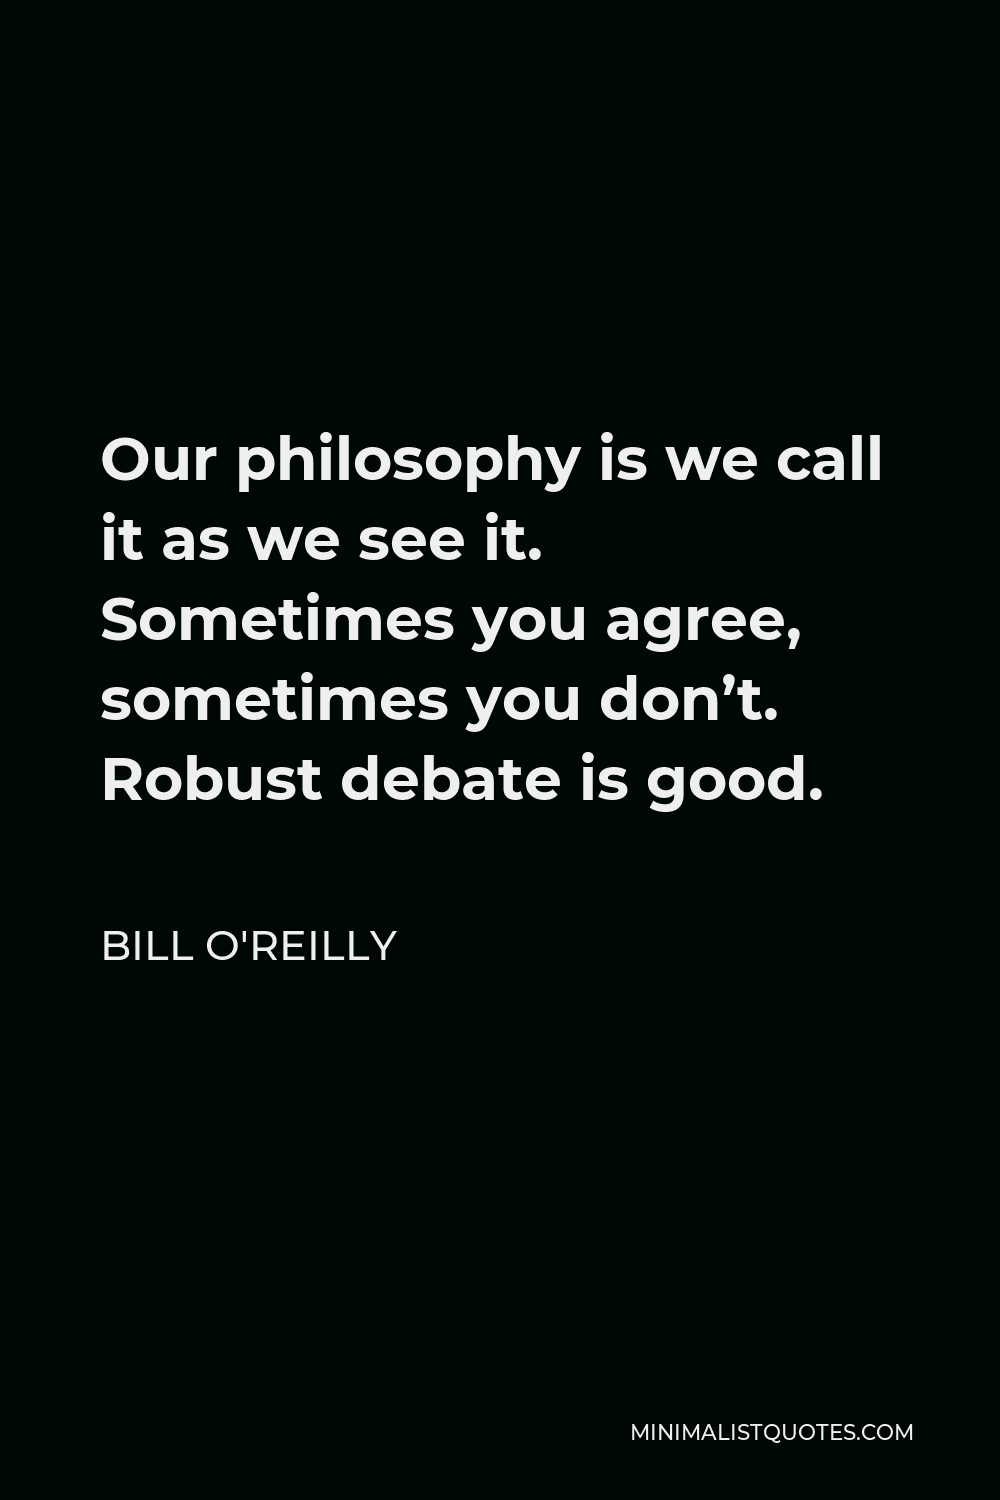 Bill O'Reilly Quote - Our philosophy is we call it as we see it. Sometimes you agree, sometimes you don’t. Robust debate is good.